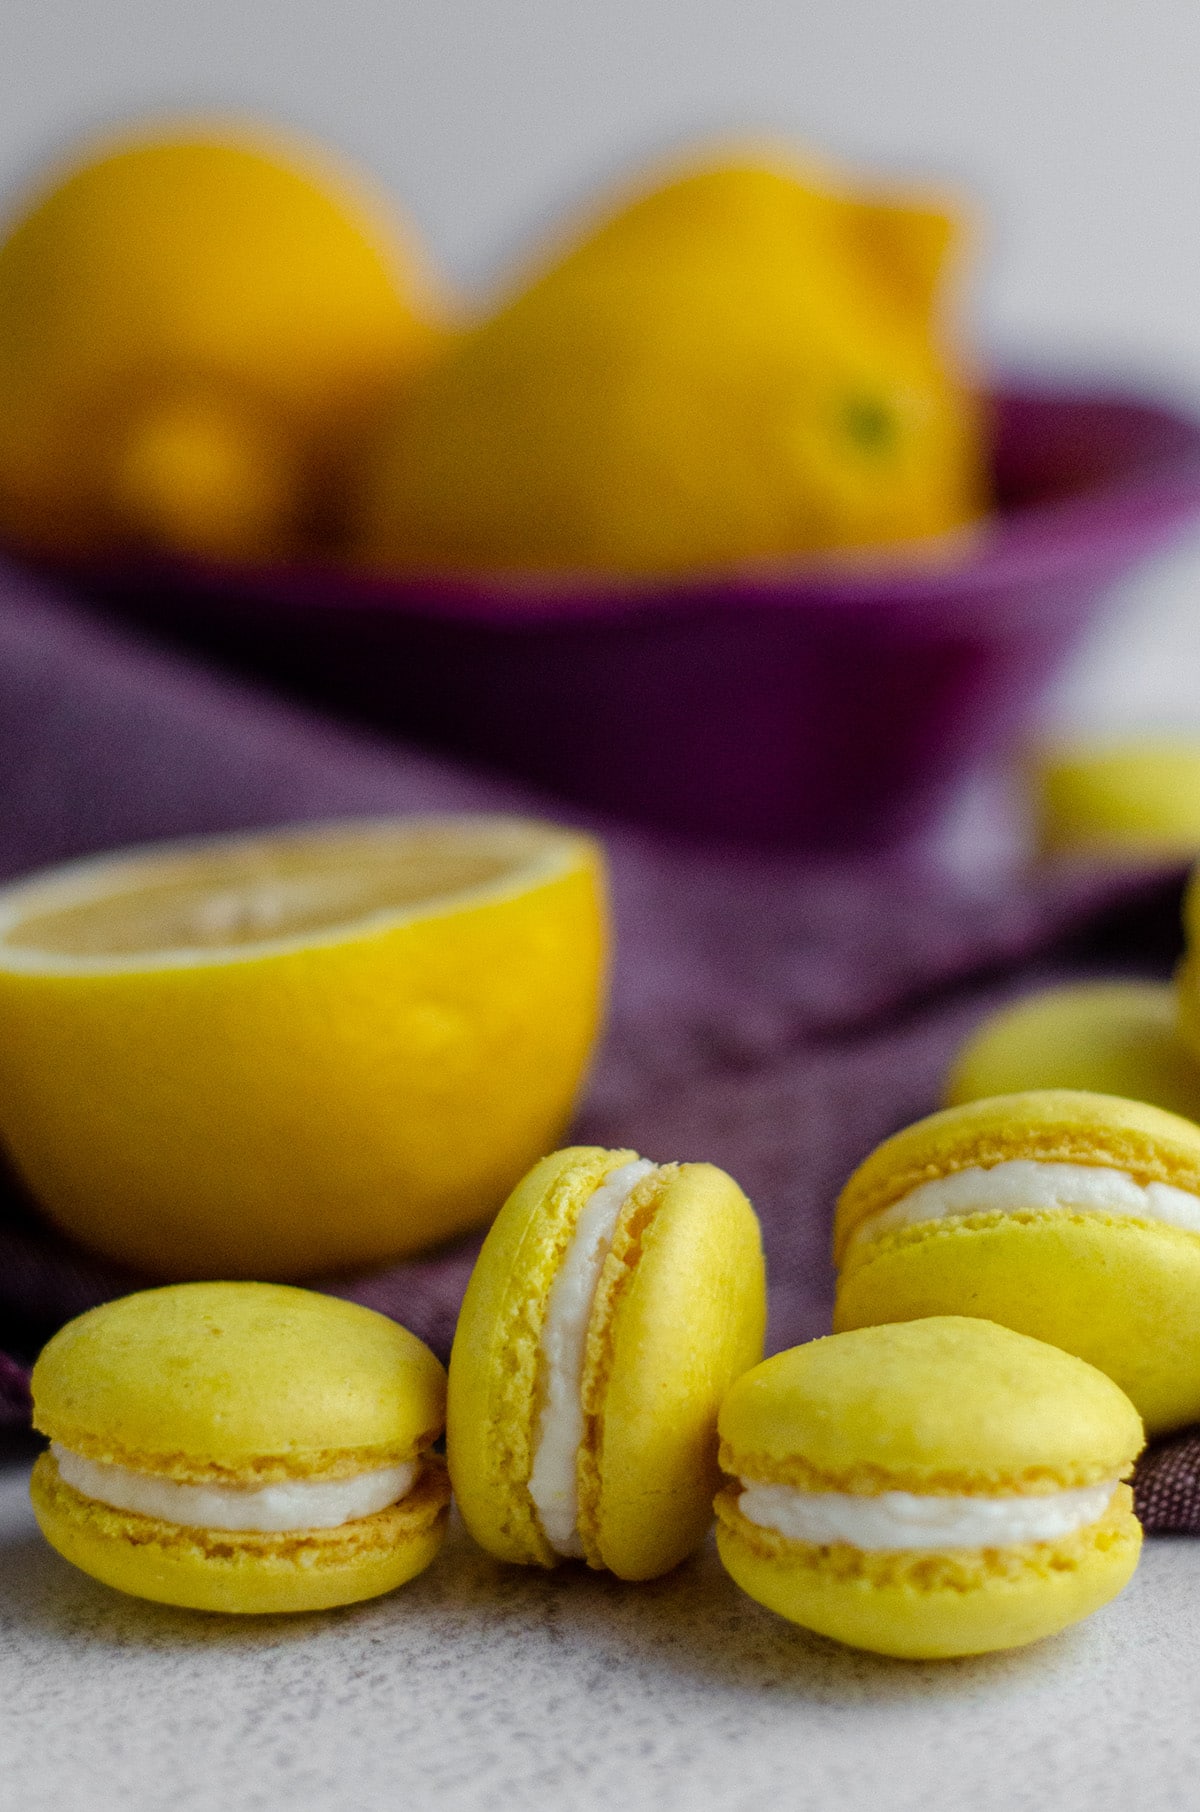 lemon macarons with a purple kitchen towel and sliced lemons in the background